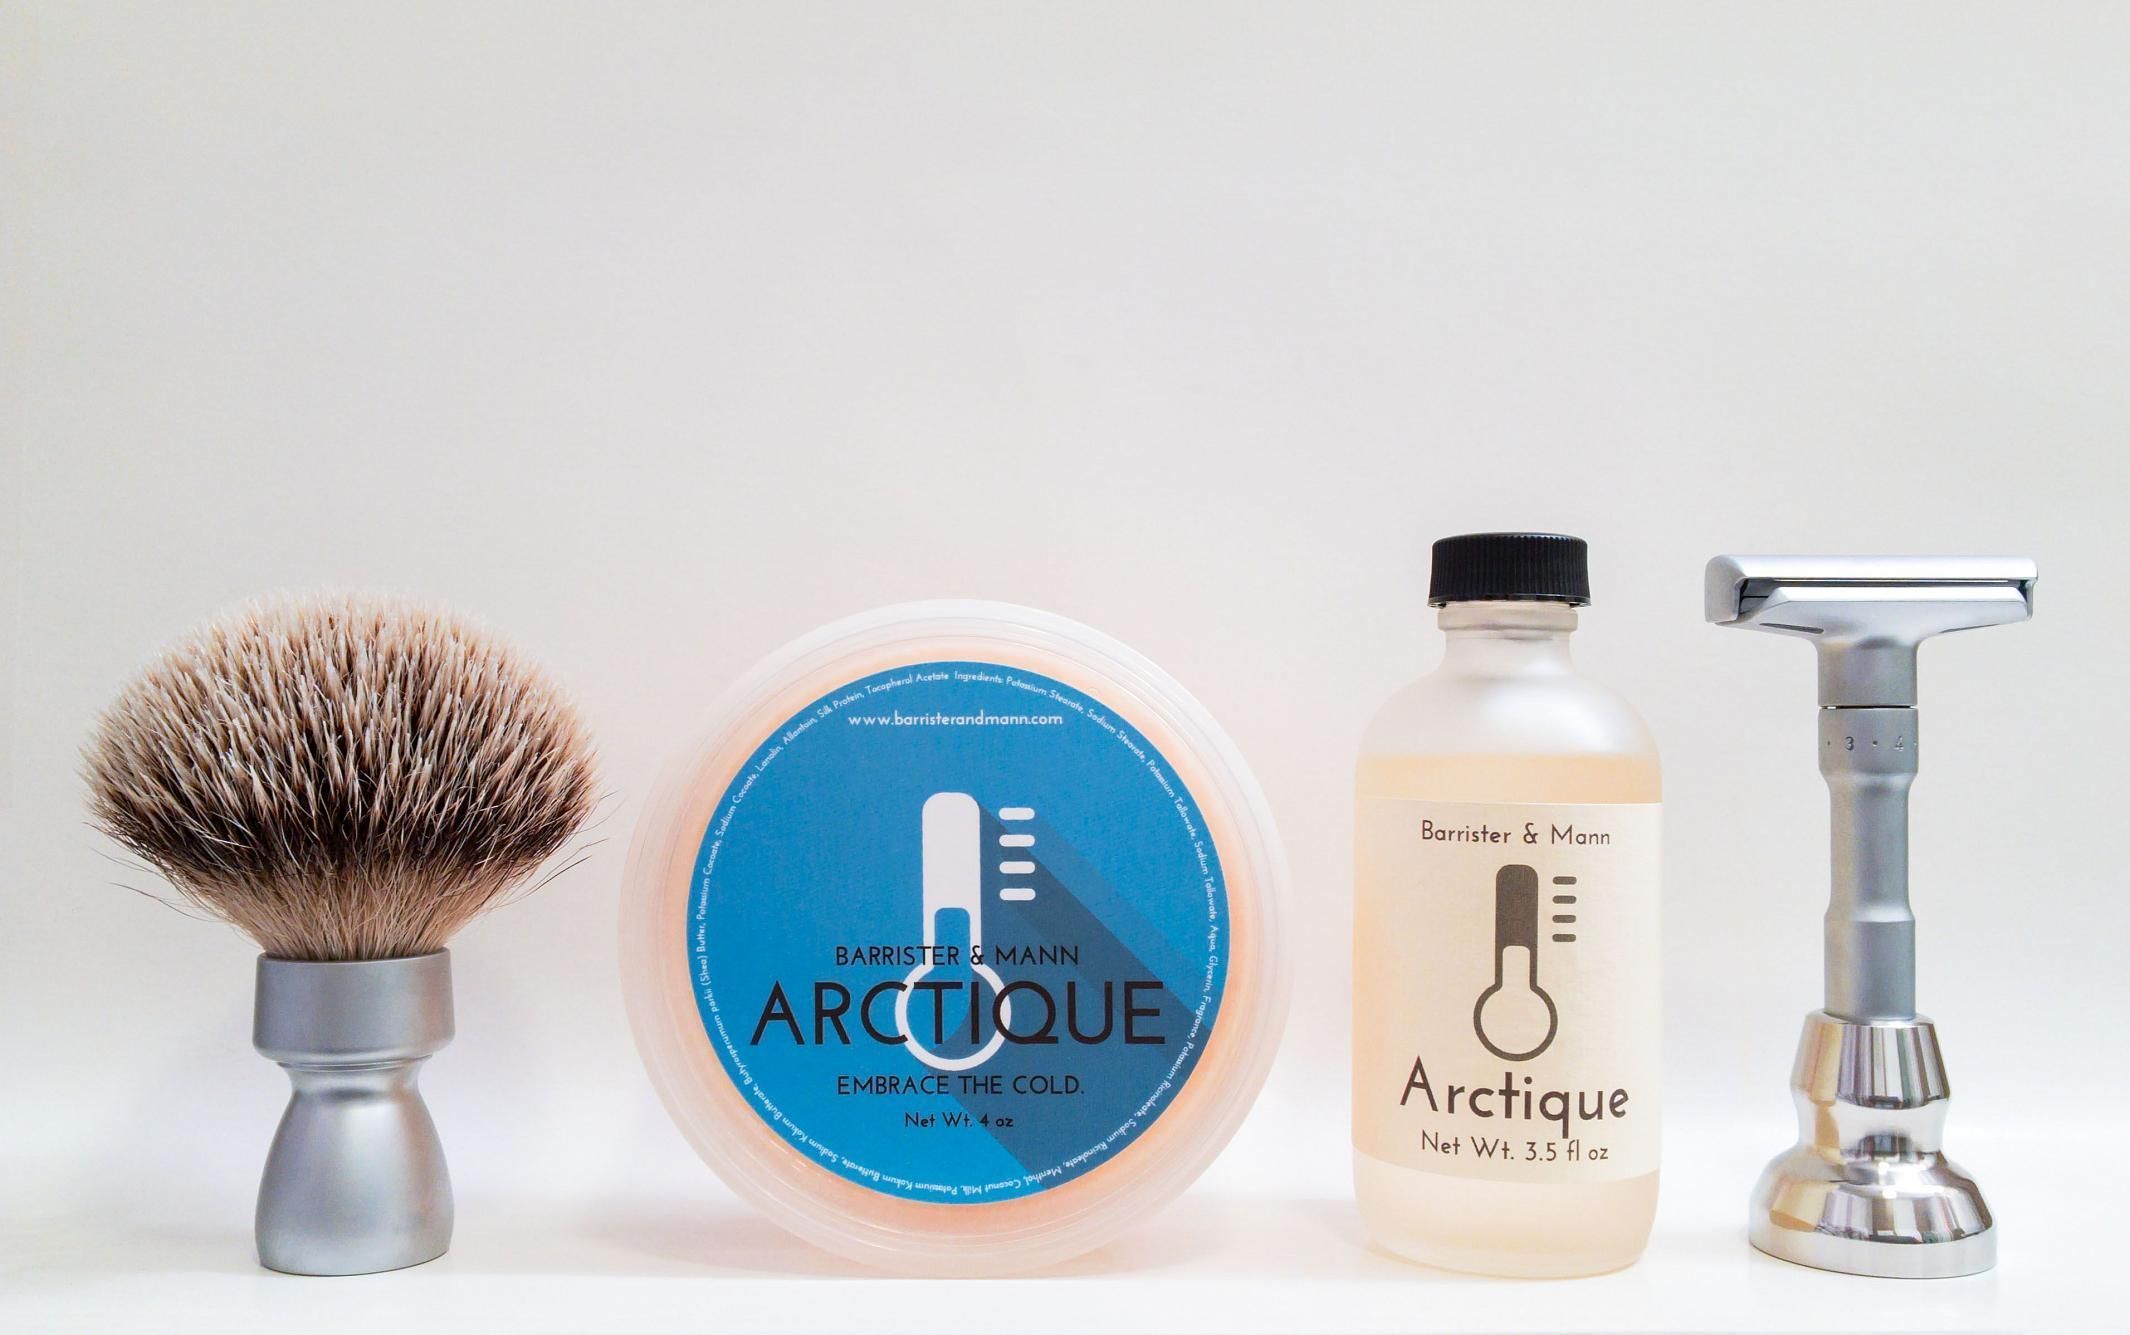 Barrister and Mann "Arctique"